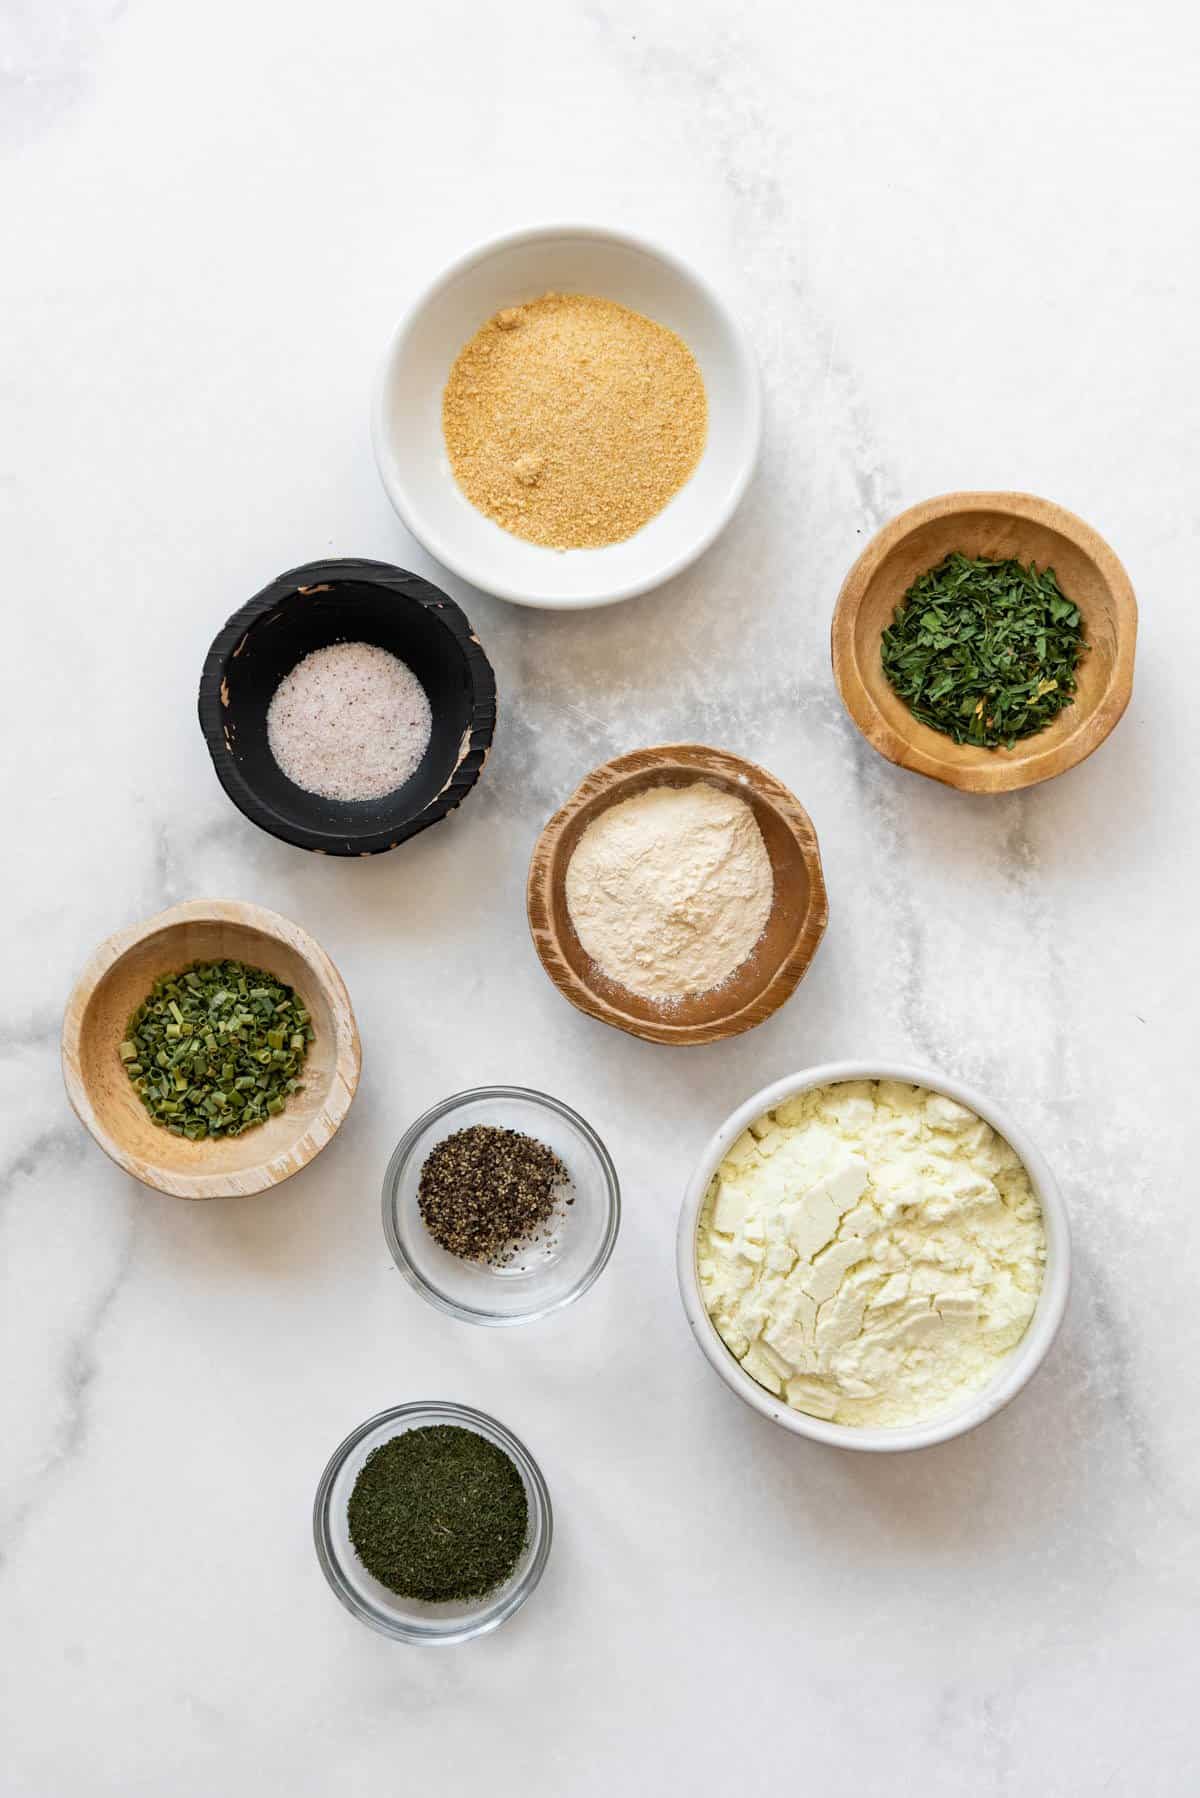 Ingredients for making homemade ranch seasoning in separate bowls on a white surface.